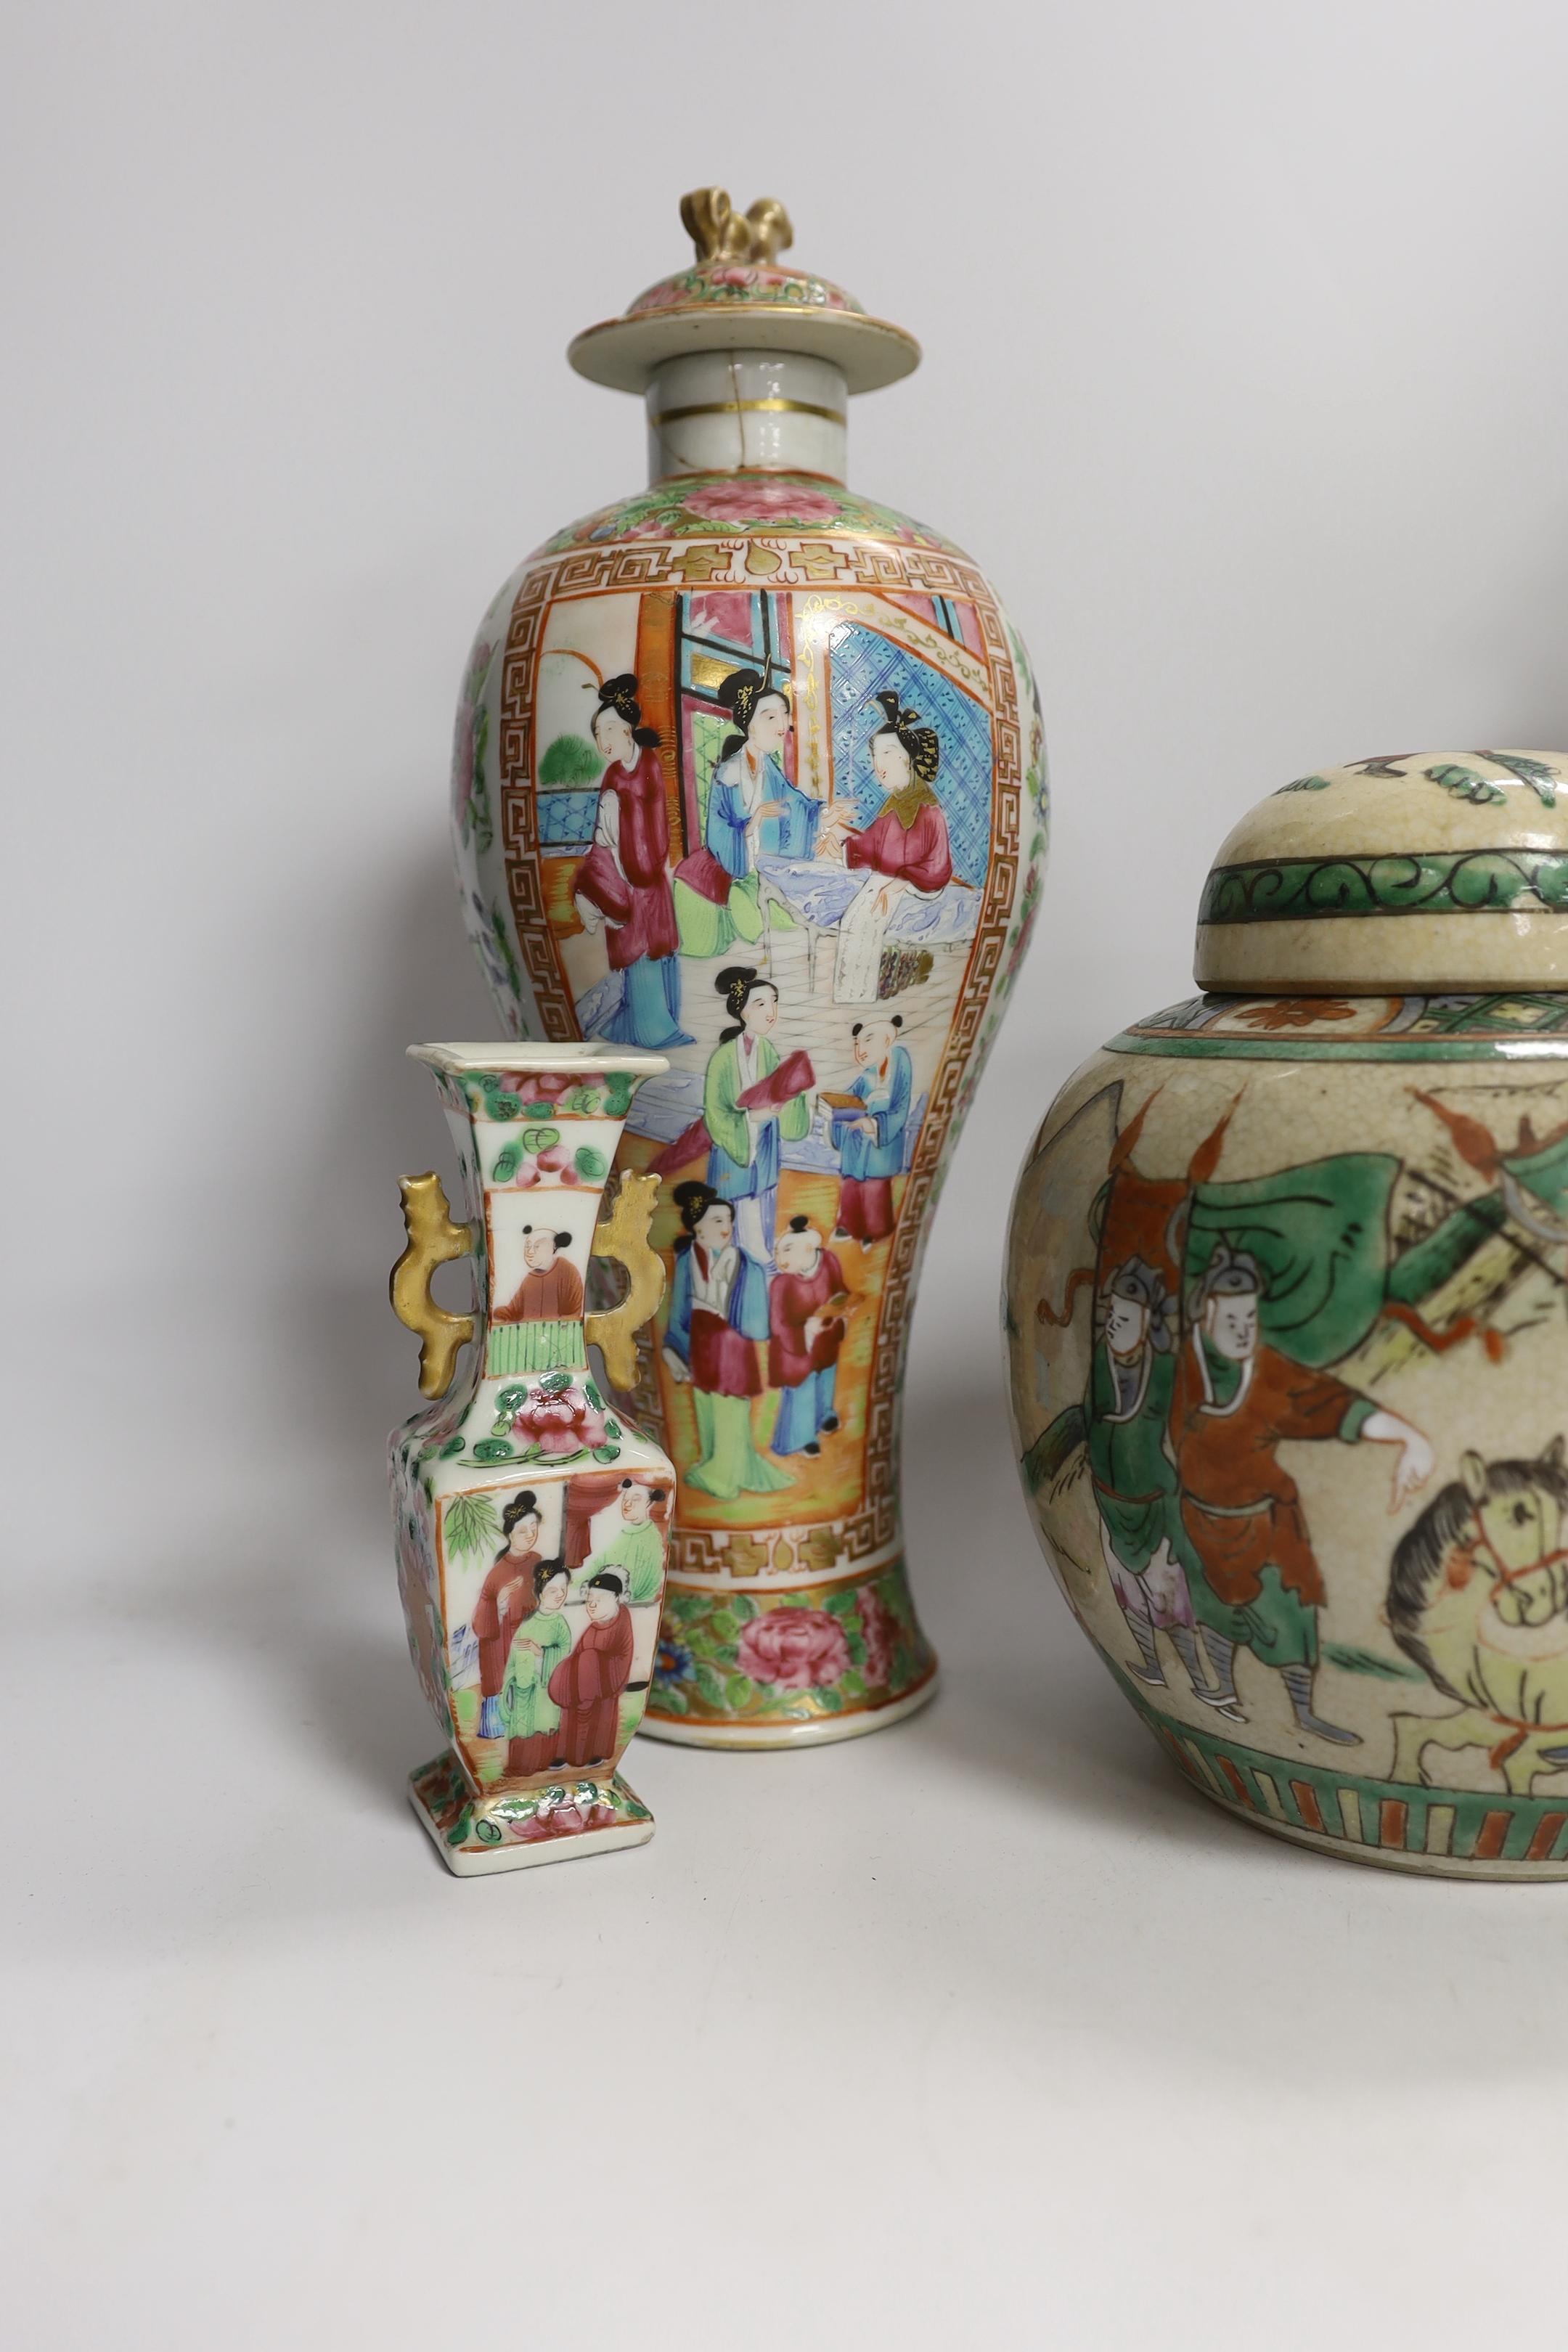 A pair of 19th century Chinese famille rose vases and covers, a similar small vase and a a famille verte crackle glaze jar, tallest 31cm